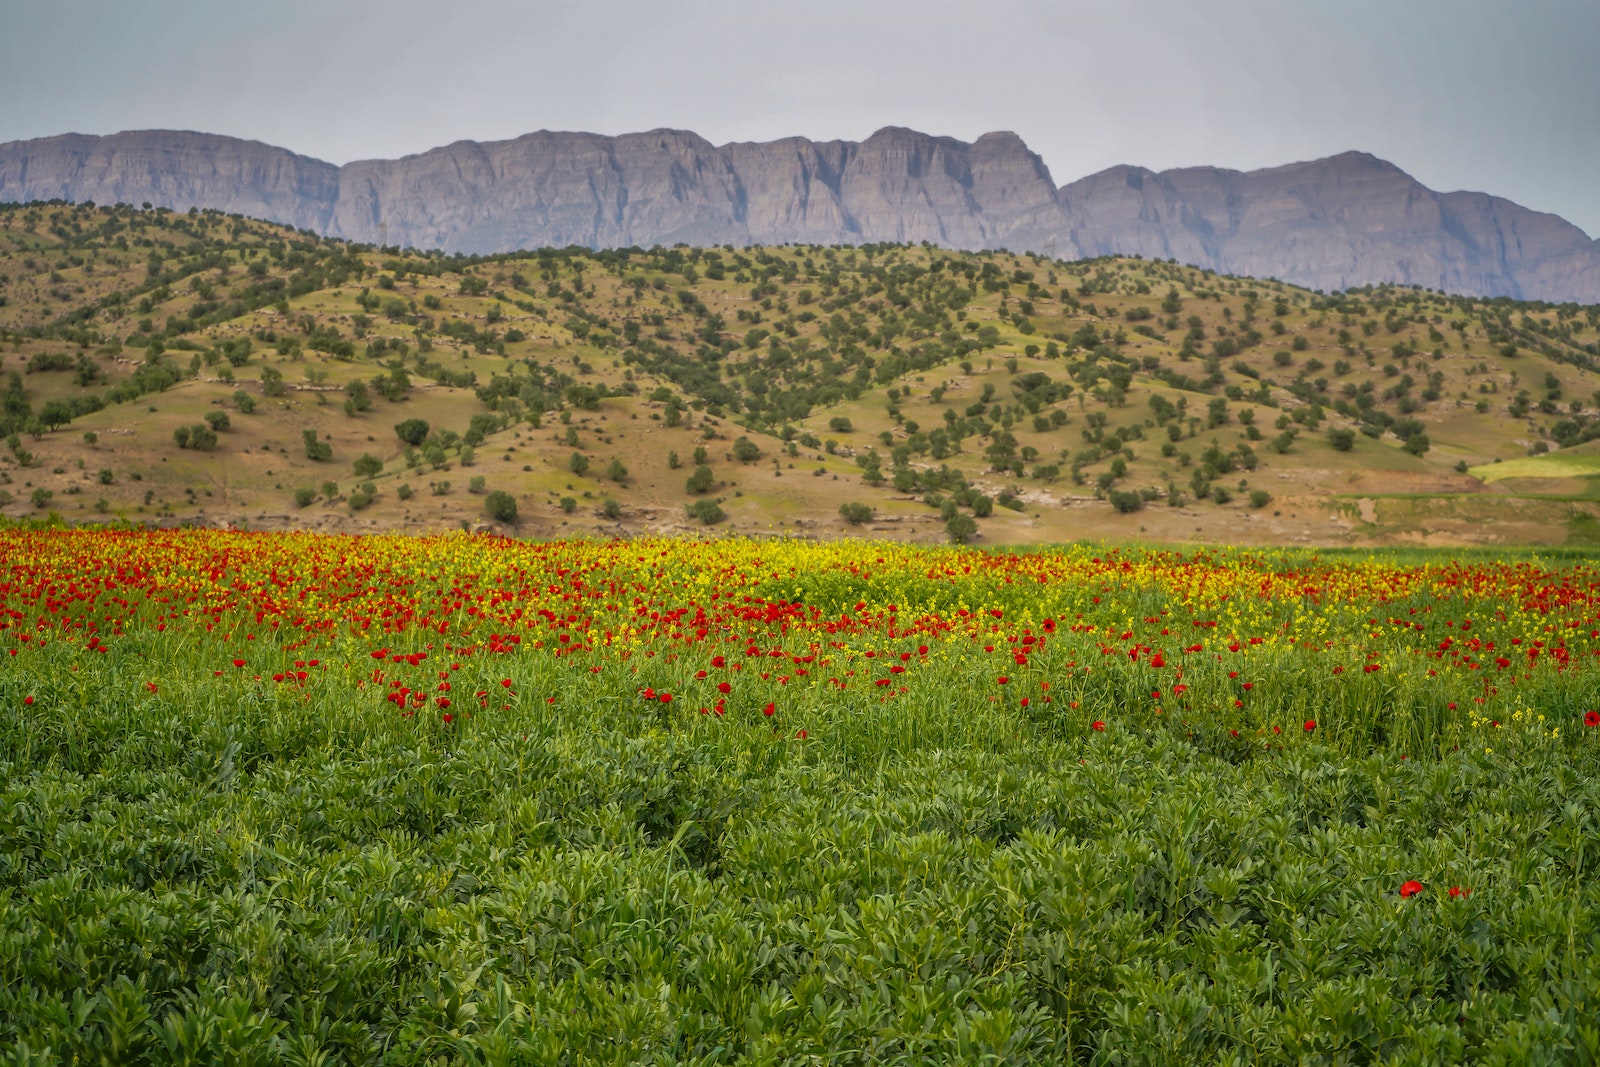 Landscape of a Poppy Field and Mountains in the Background